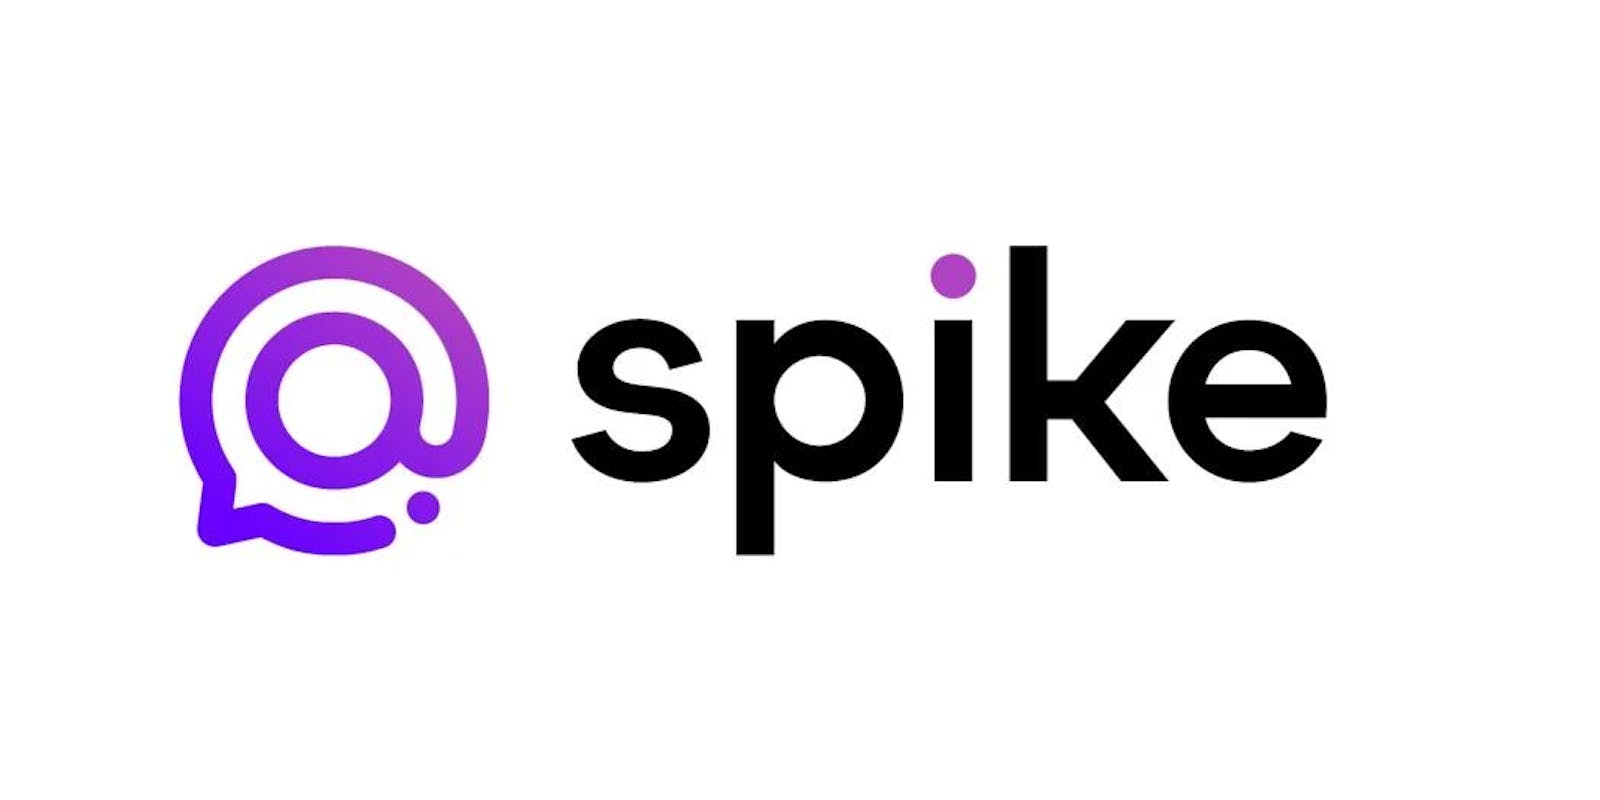 Getting Started With Conversational Email on Android With Spike